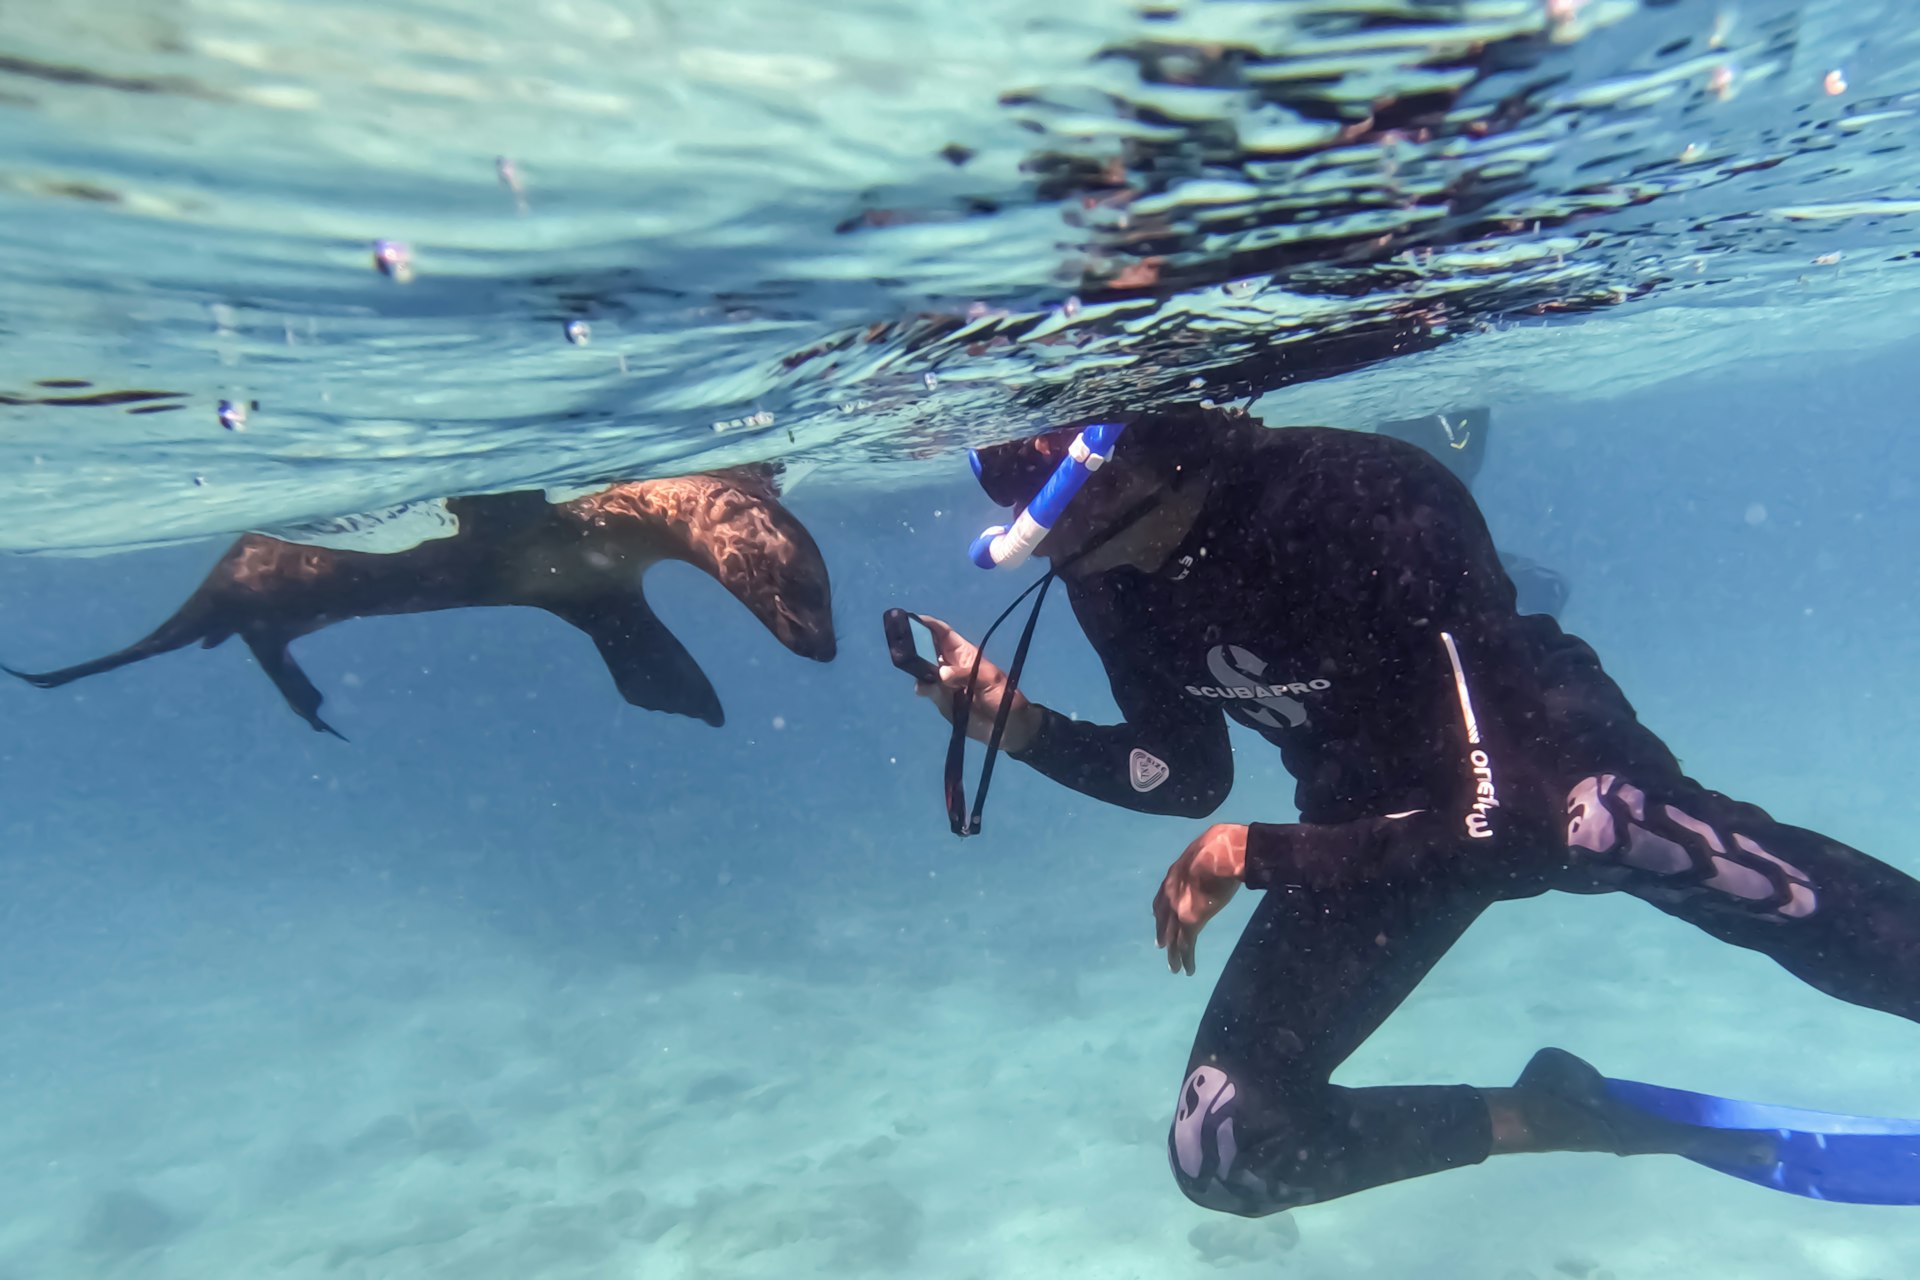 A snorkeler takes a photo of a baby sea lion underwater